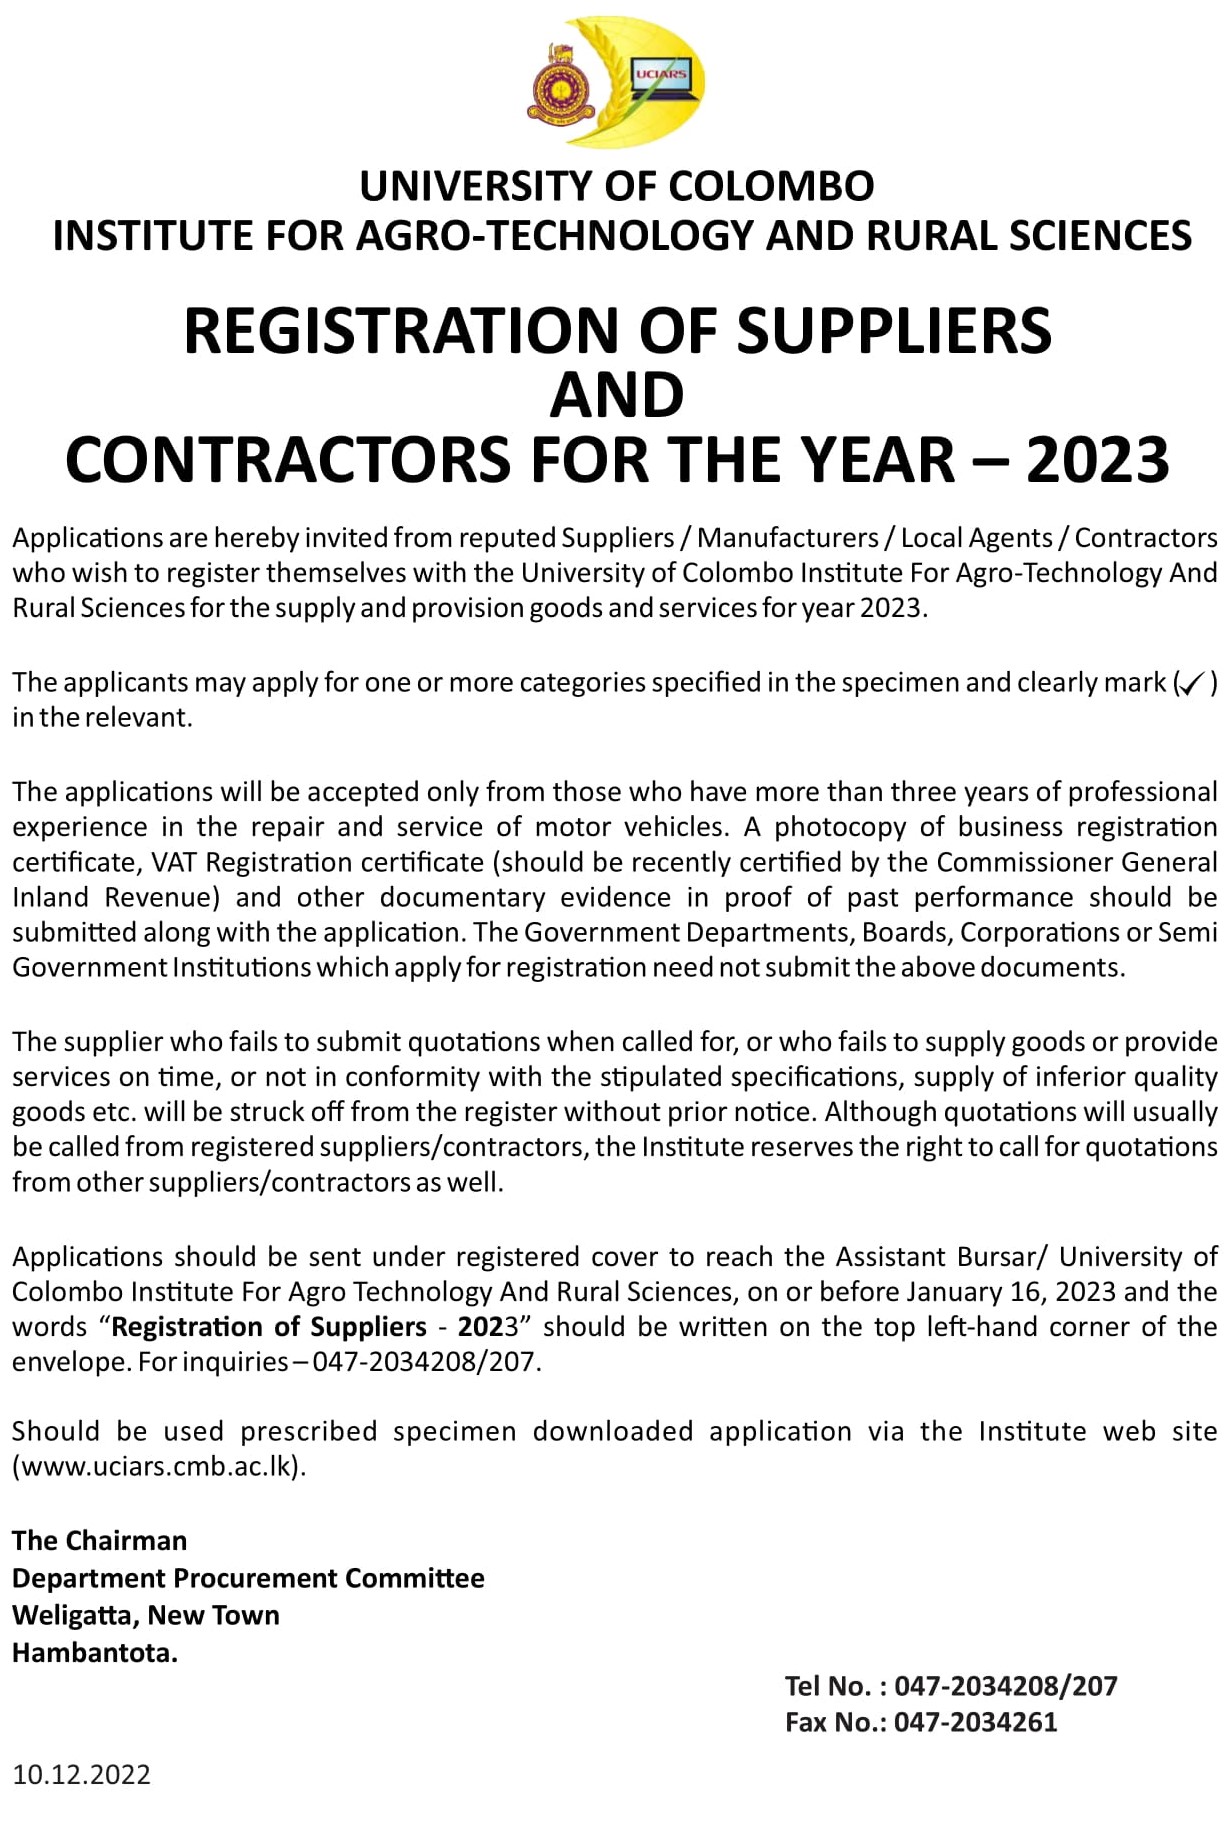 Registration of Suppliers and Contractors for the Year 2023